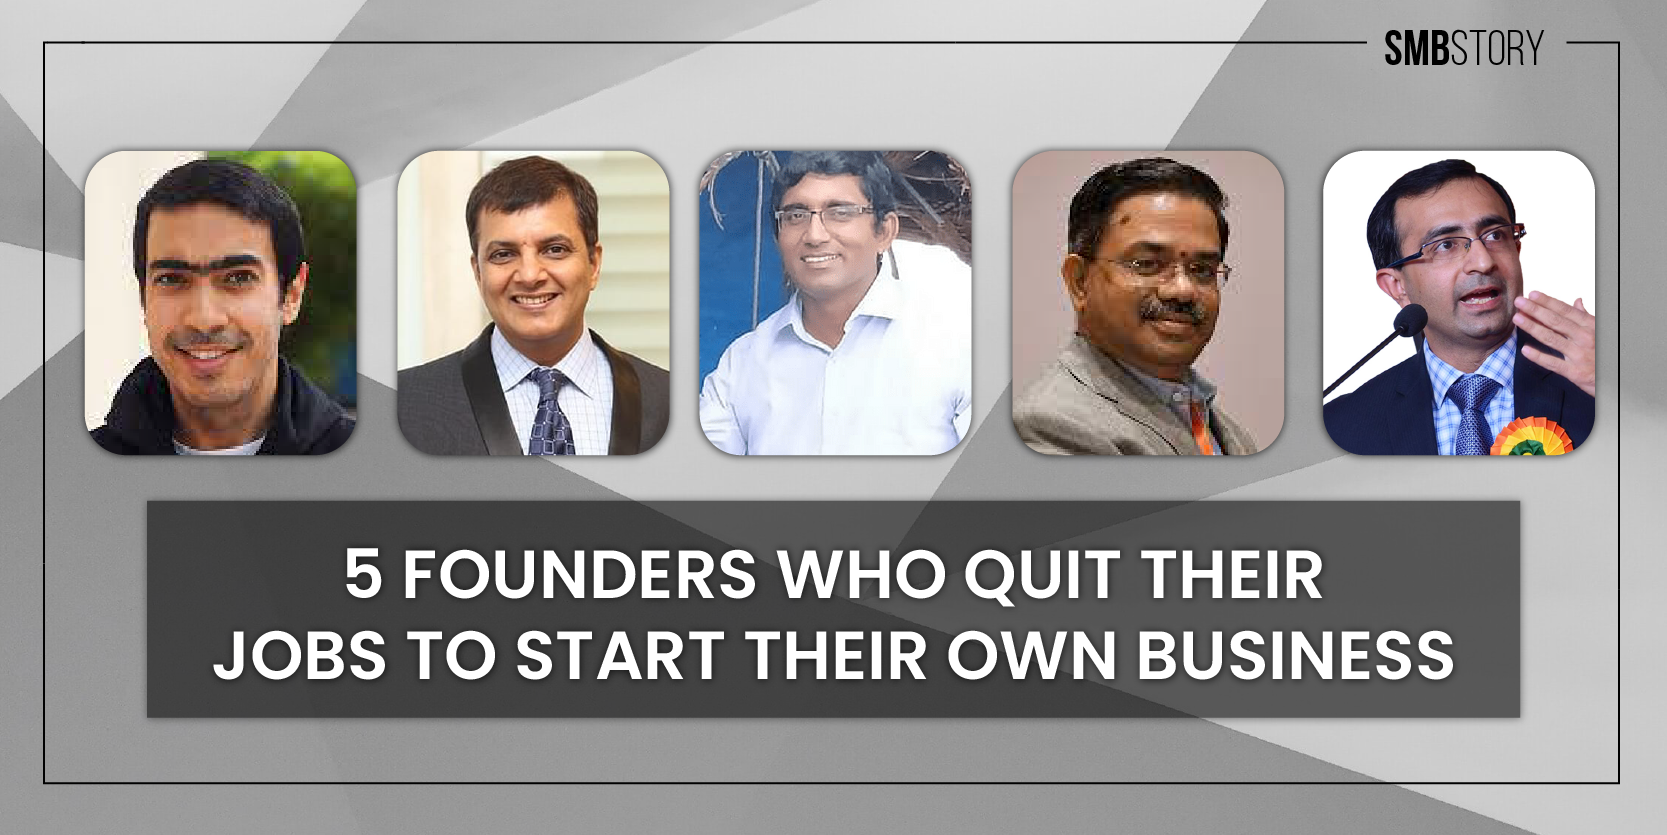 Meet these 5 entrepreneurs who quit their corporate jobs and built successful businesses - YourStory